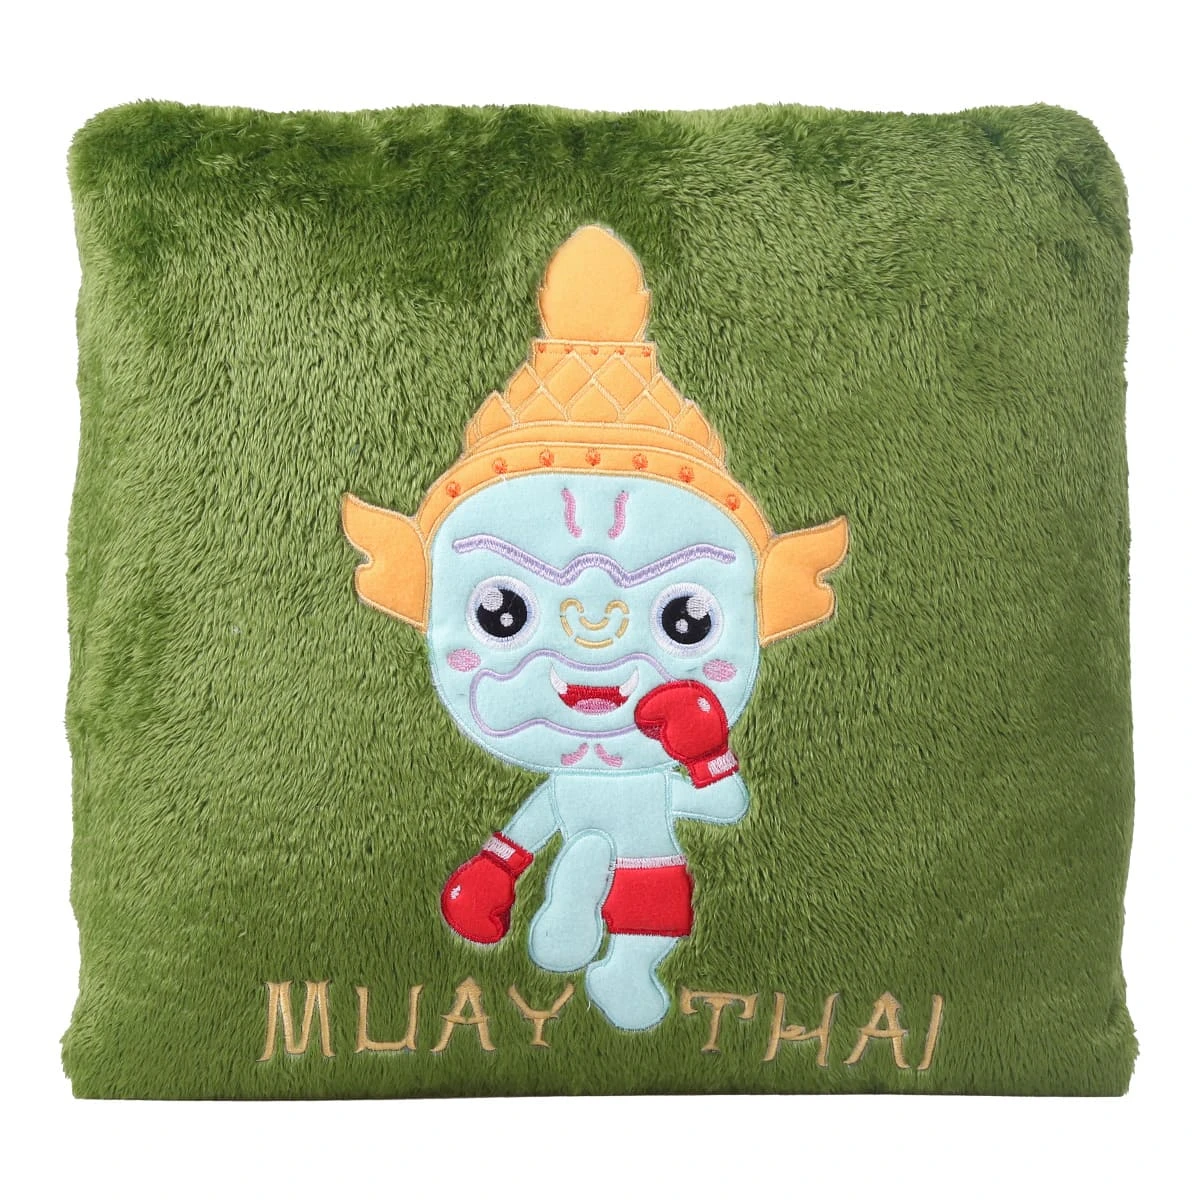 Recycled Polyester Muay Thai Giant Plush Pillow Blanket (Green)